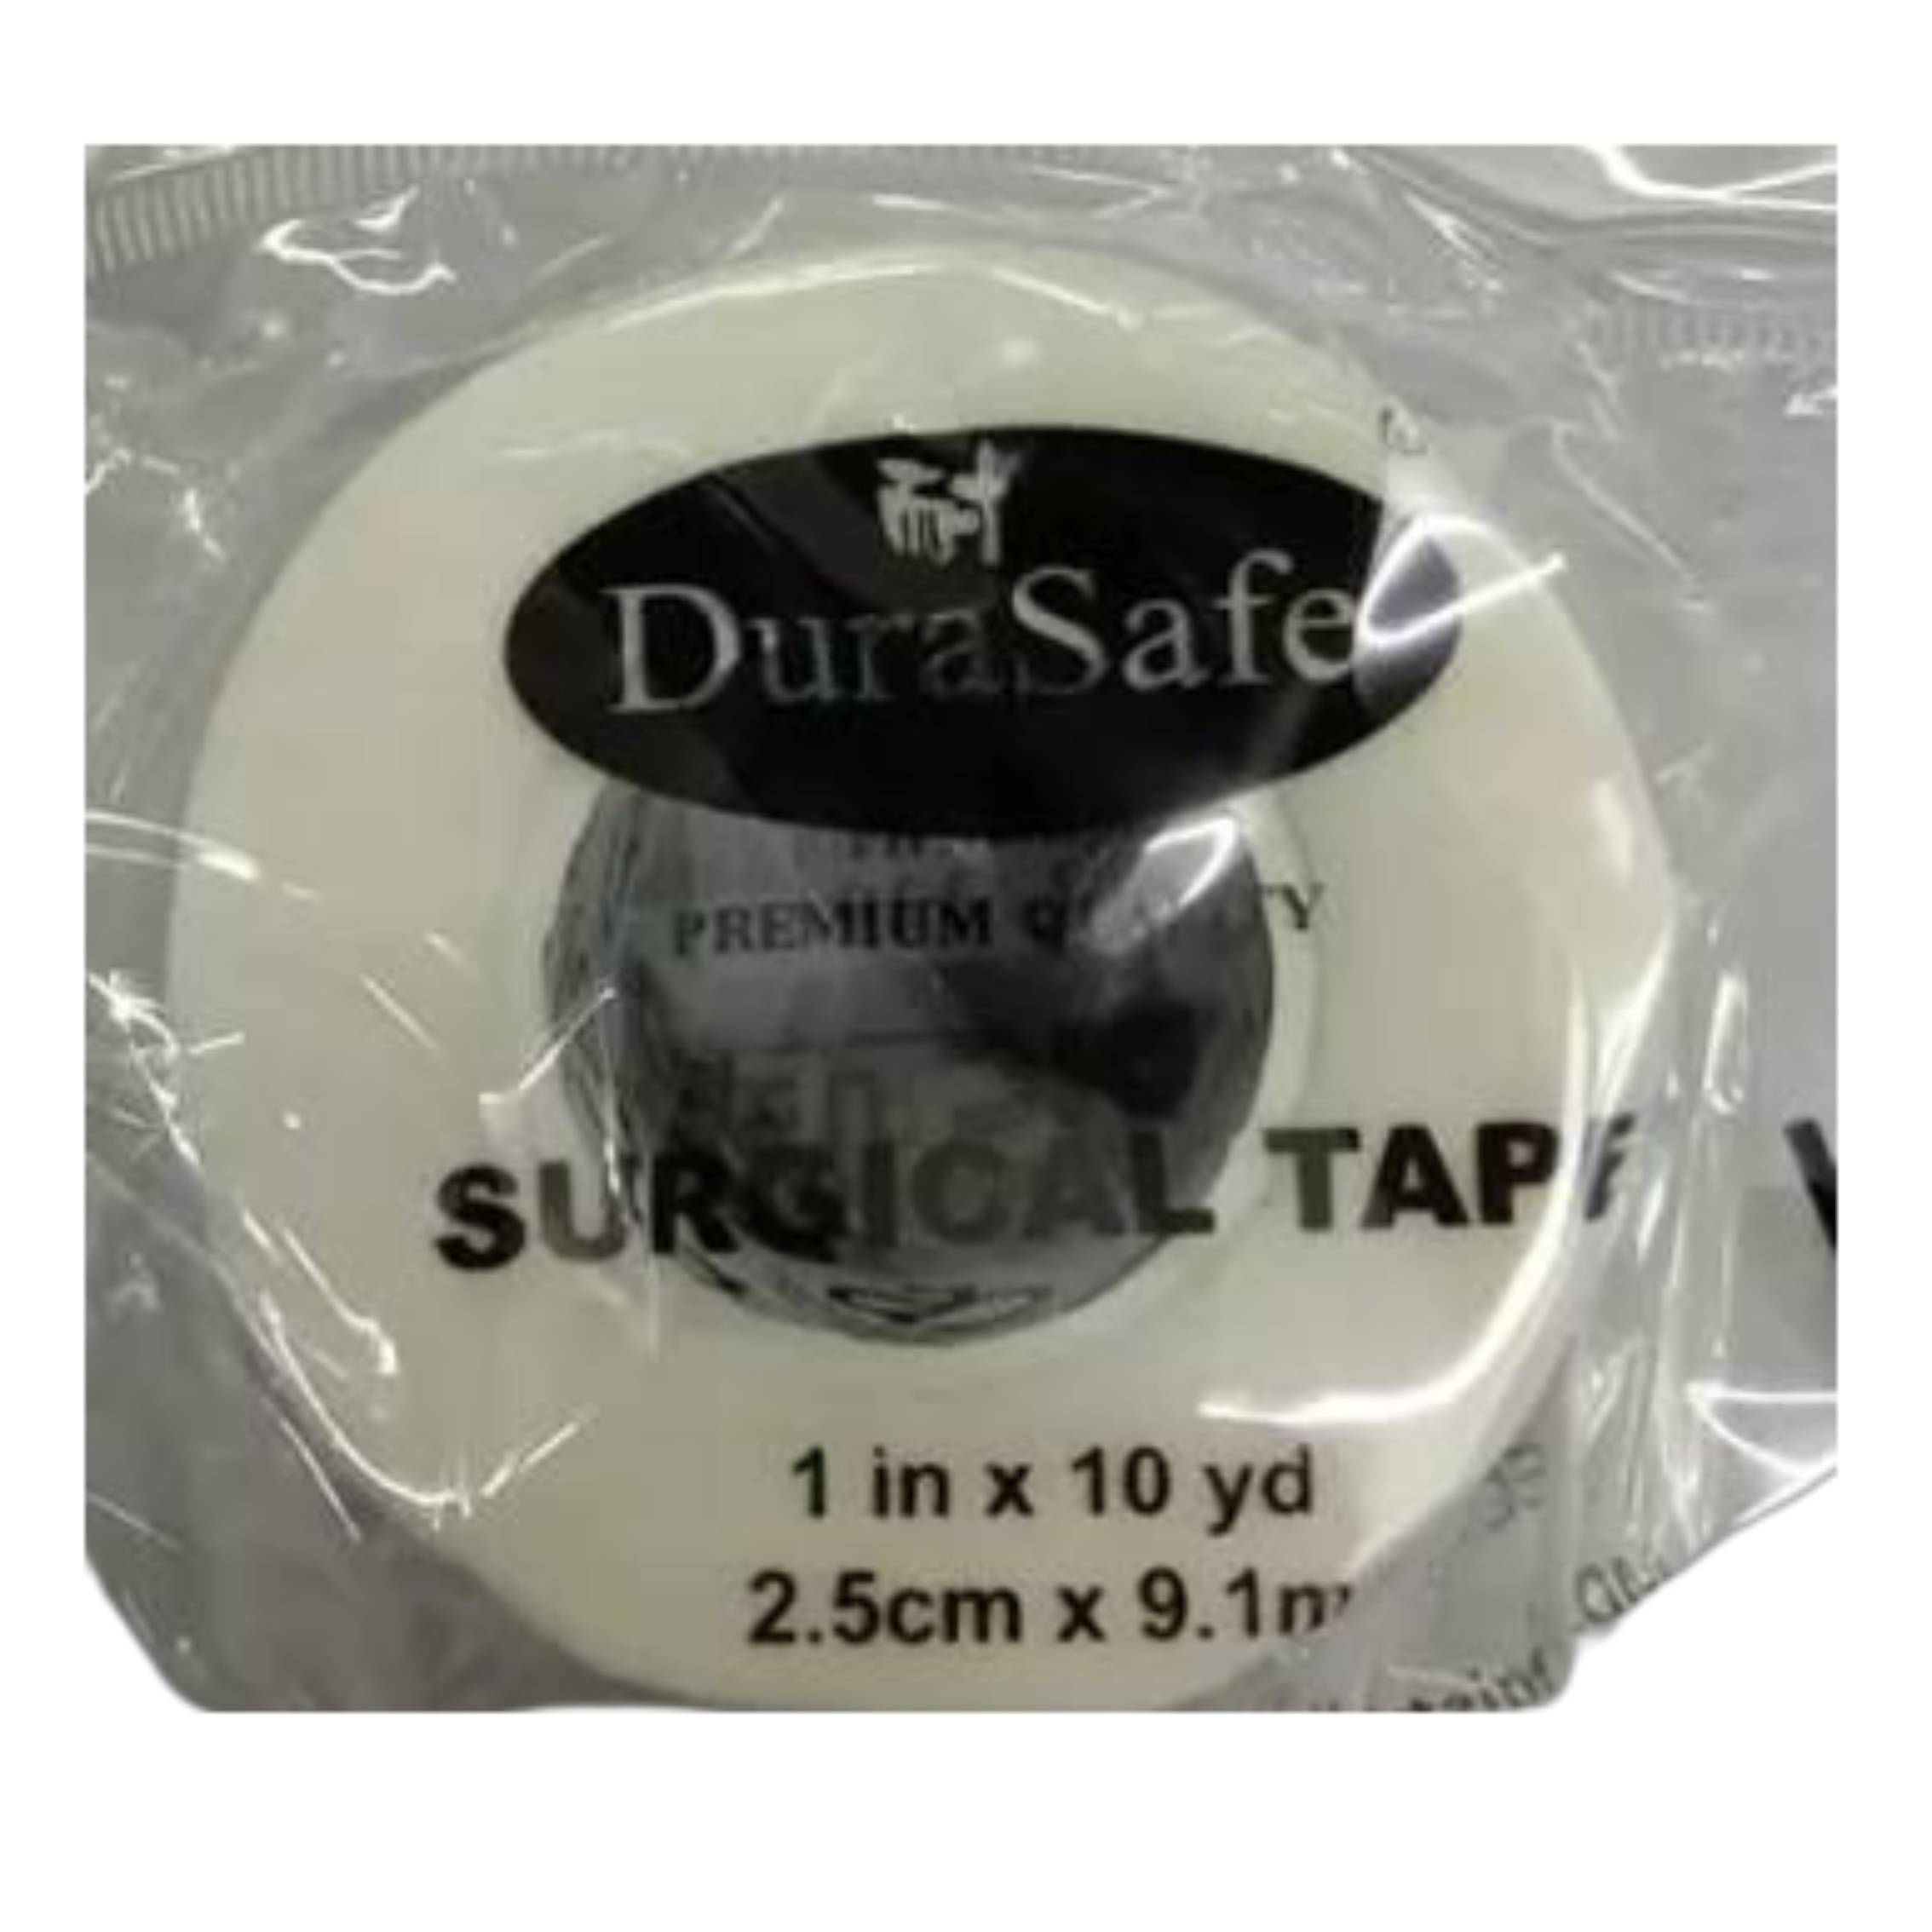 DuraSafe Surgical Tape Without Dispenser 1s 2 inches - DoctorOnCall Online Pharmacy